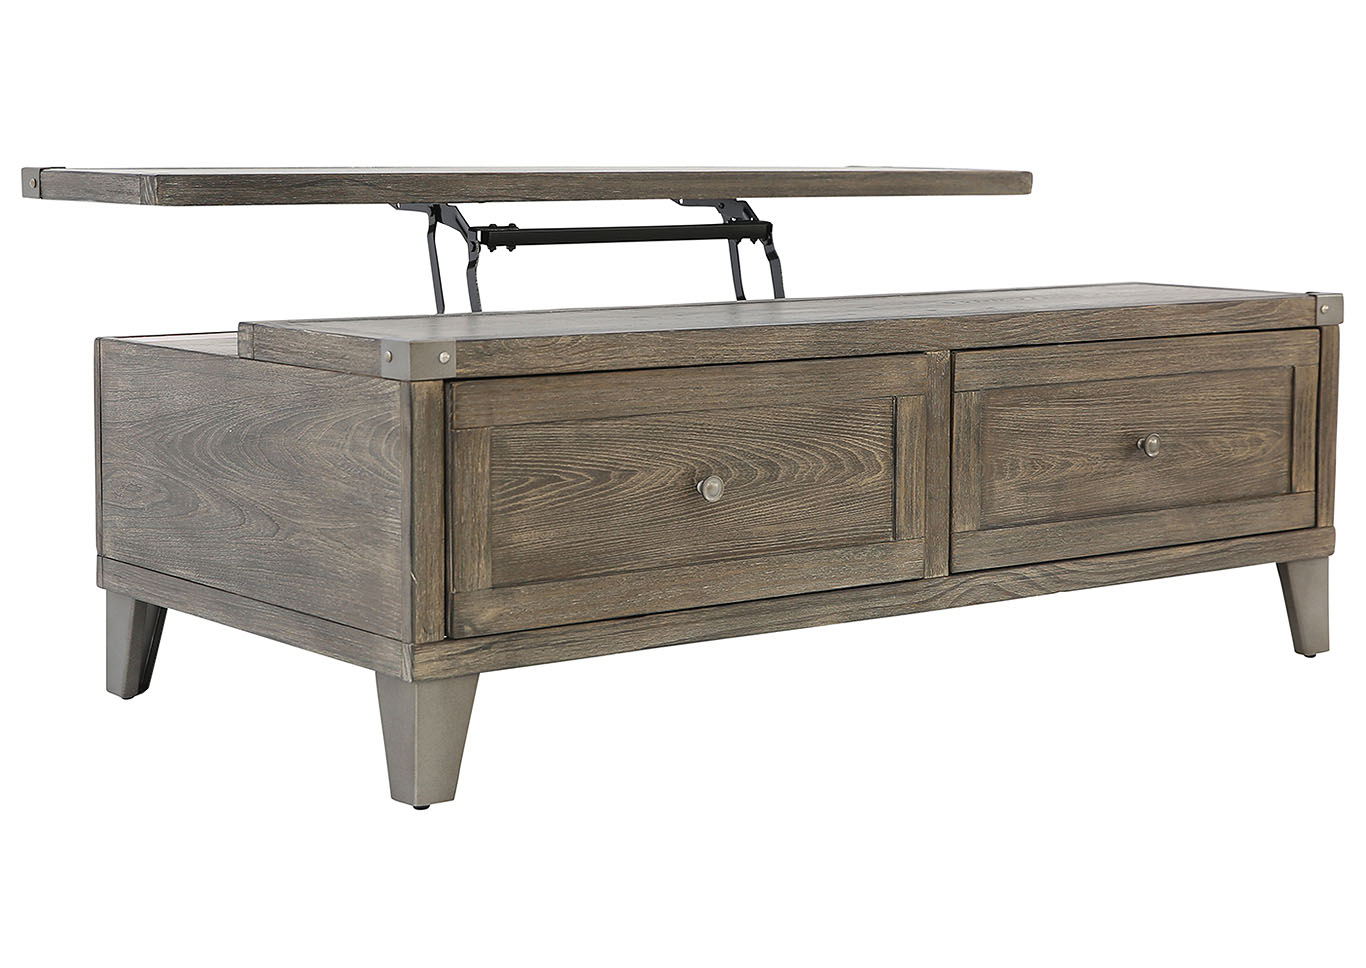 CHAZNEY LIFT TOP COCKTAIL TABLE,ASHLEY FURNITURE INC.